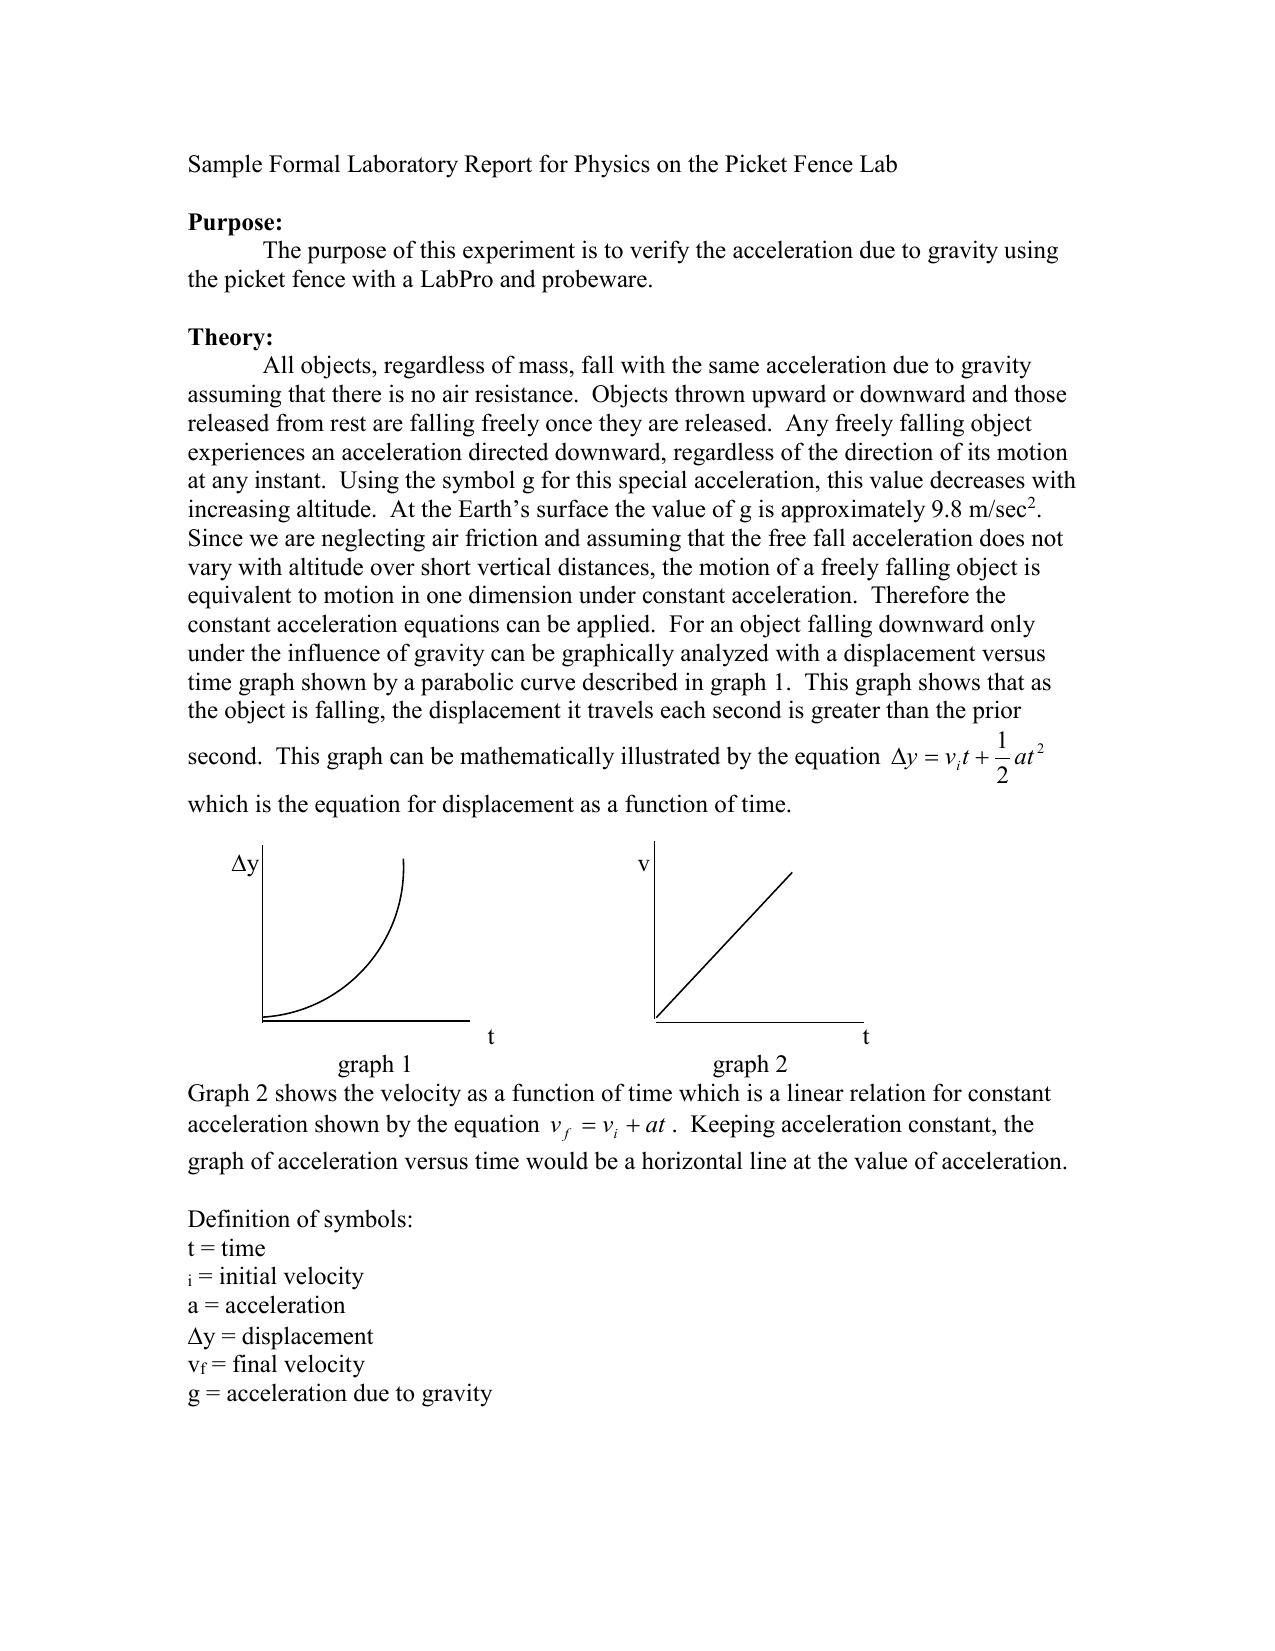 acceleration due to gravity lab report example